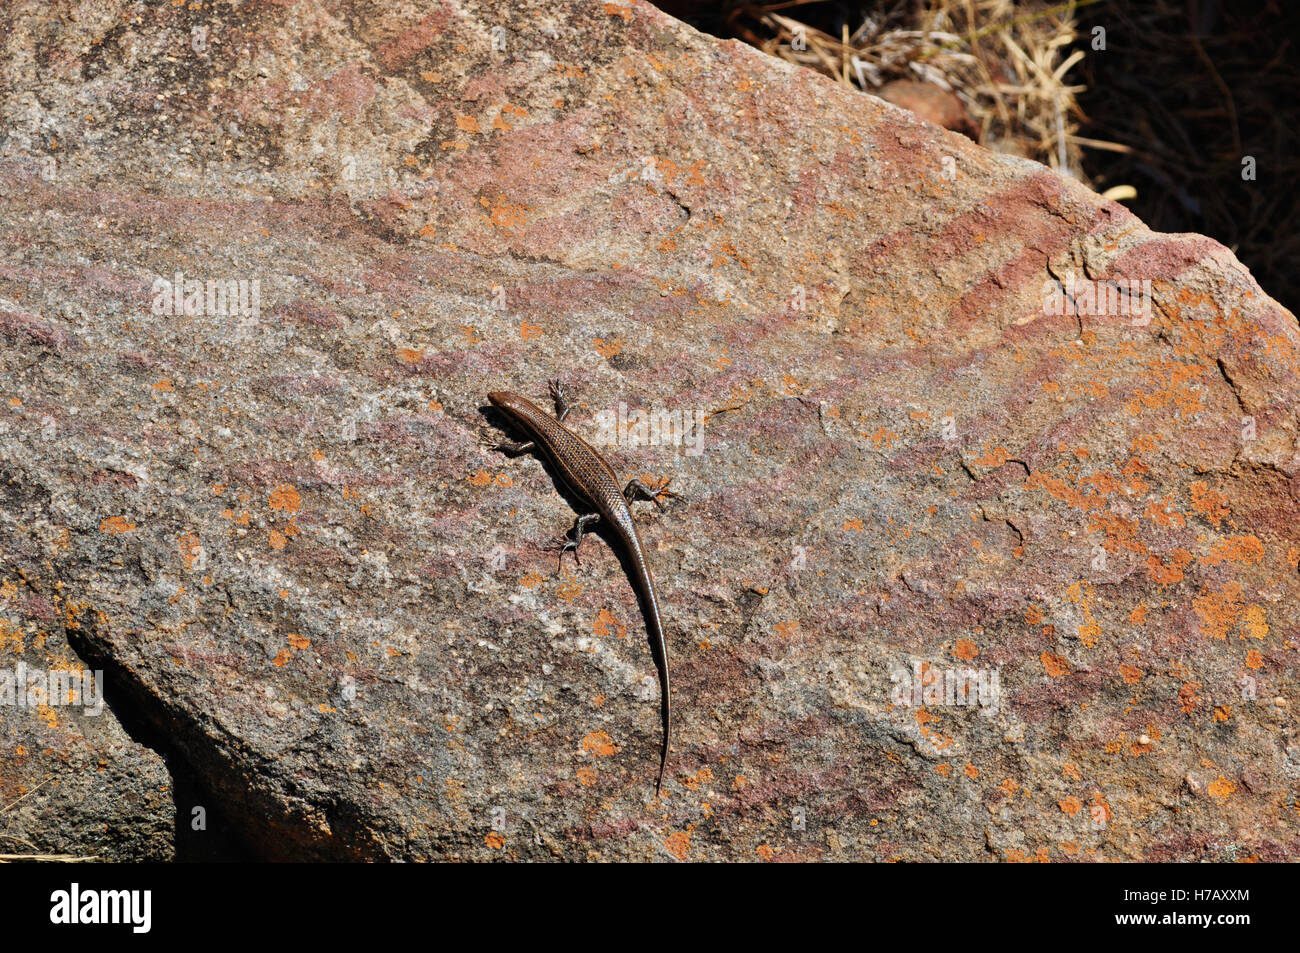 Nature and wildlife, rettil, cold-blooded animals: a brown lizard on a red rock Stock Photo